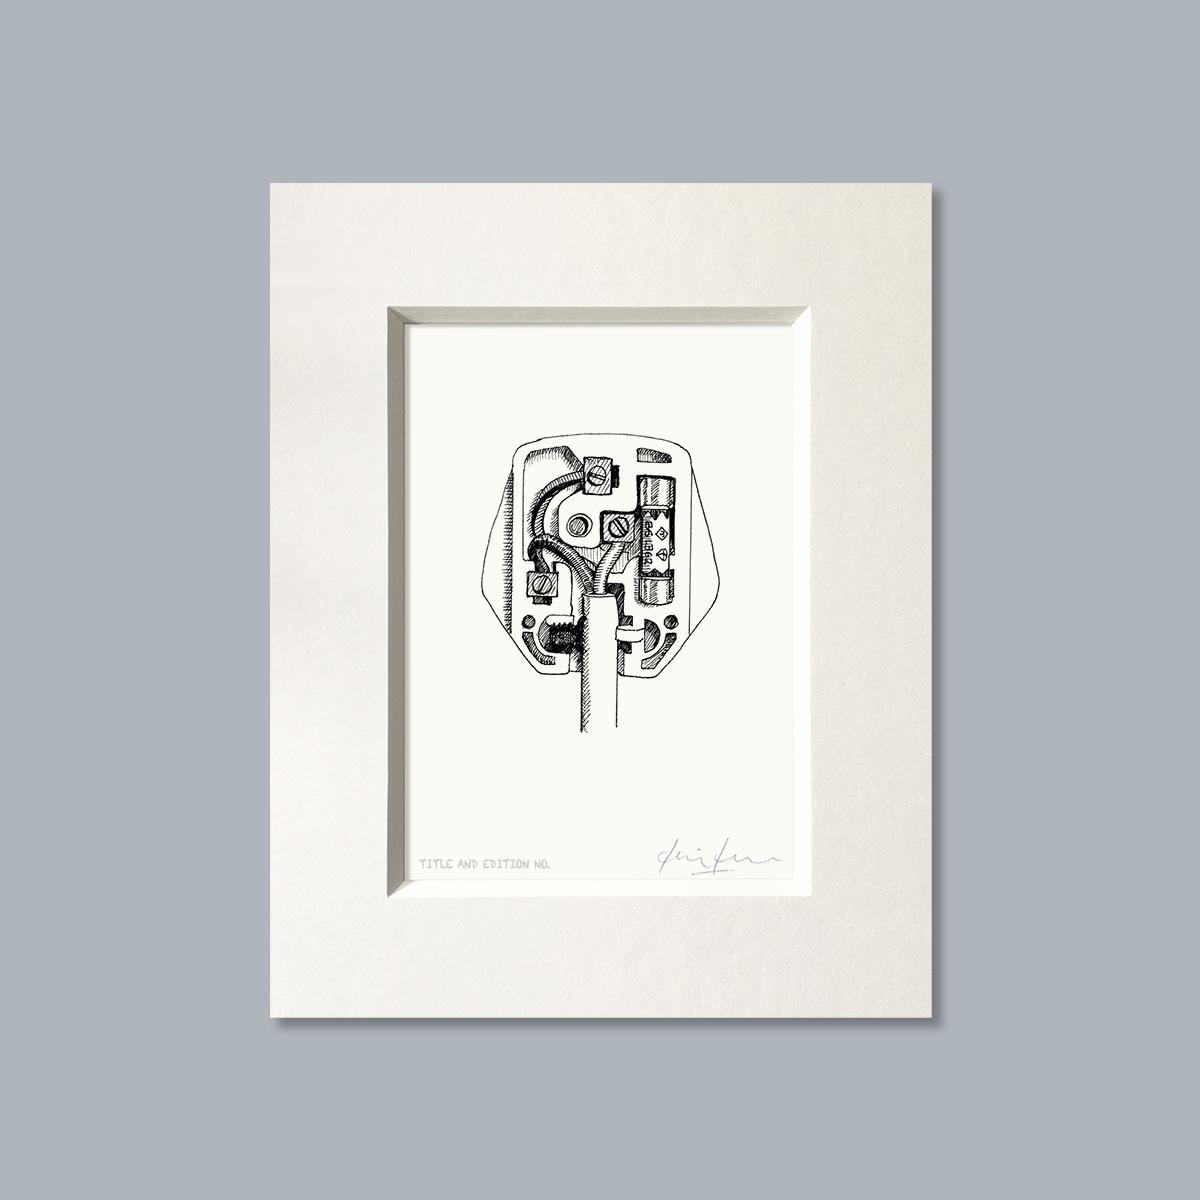 Limited edition print from pen and ink drawing of a 13 amp plug in a white mount